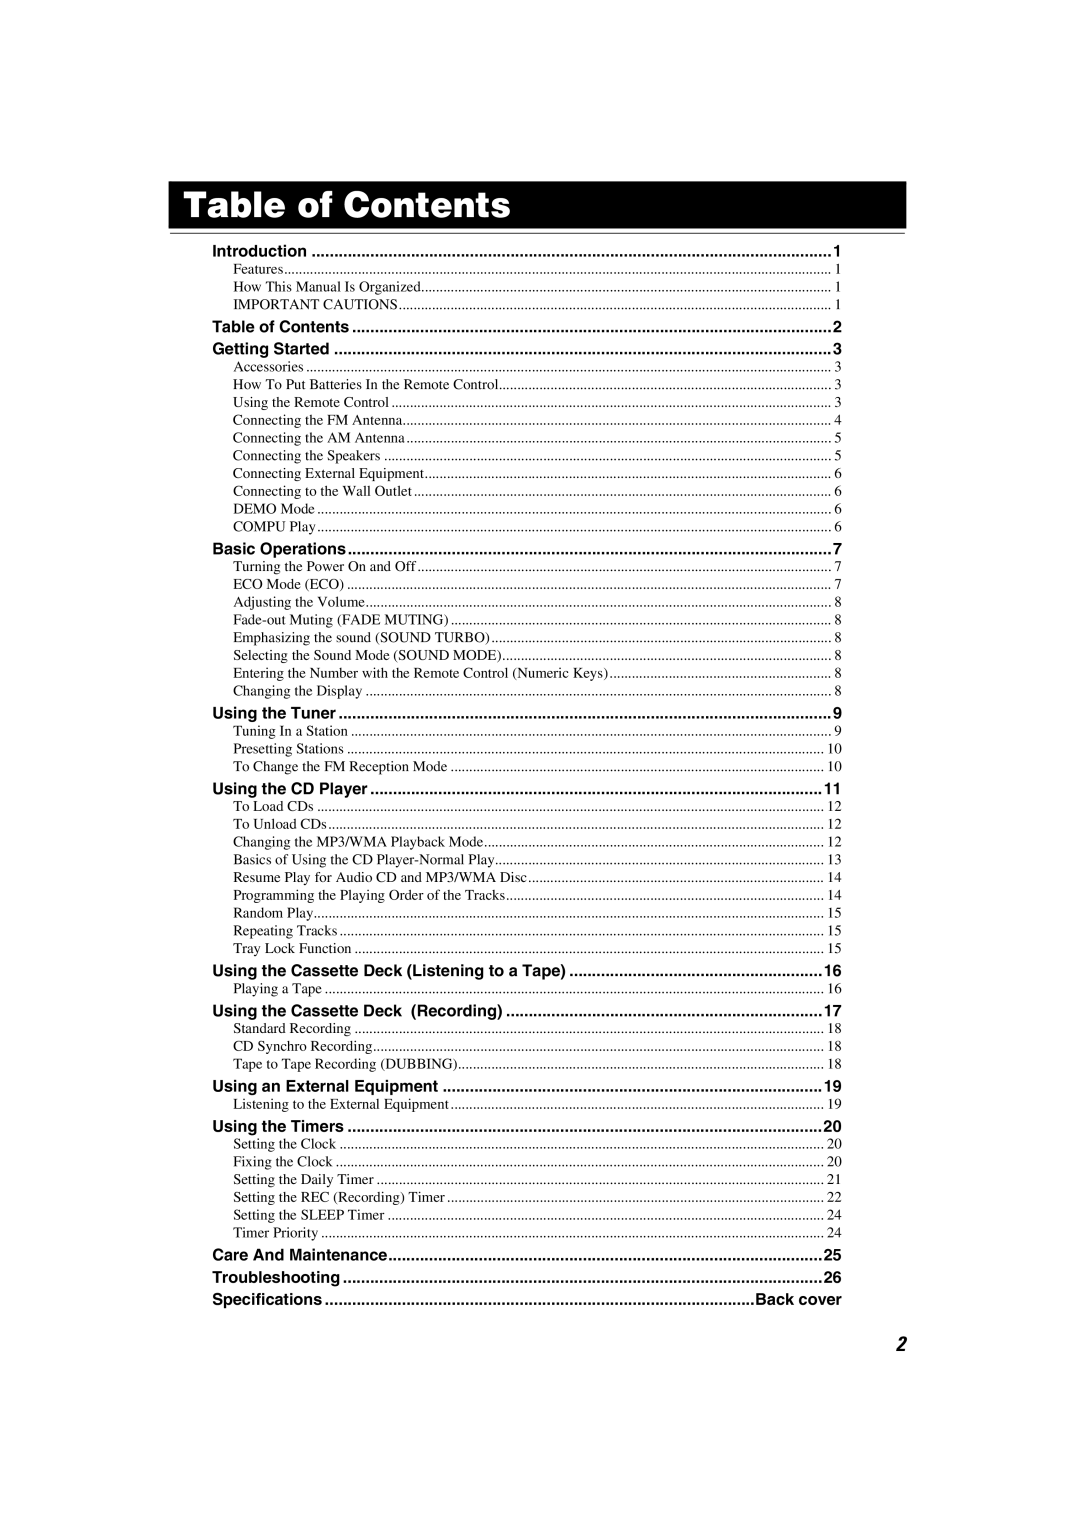 JVC MX-KC45 manual Table of Contents 